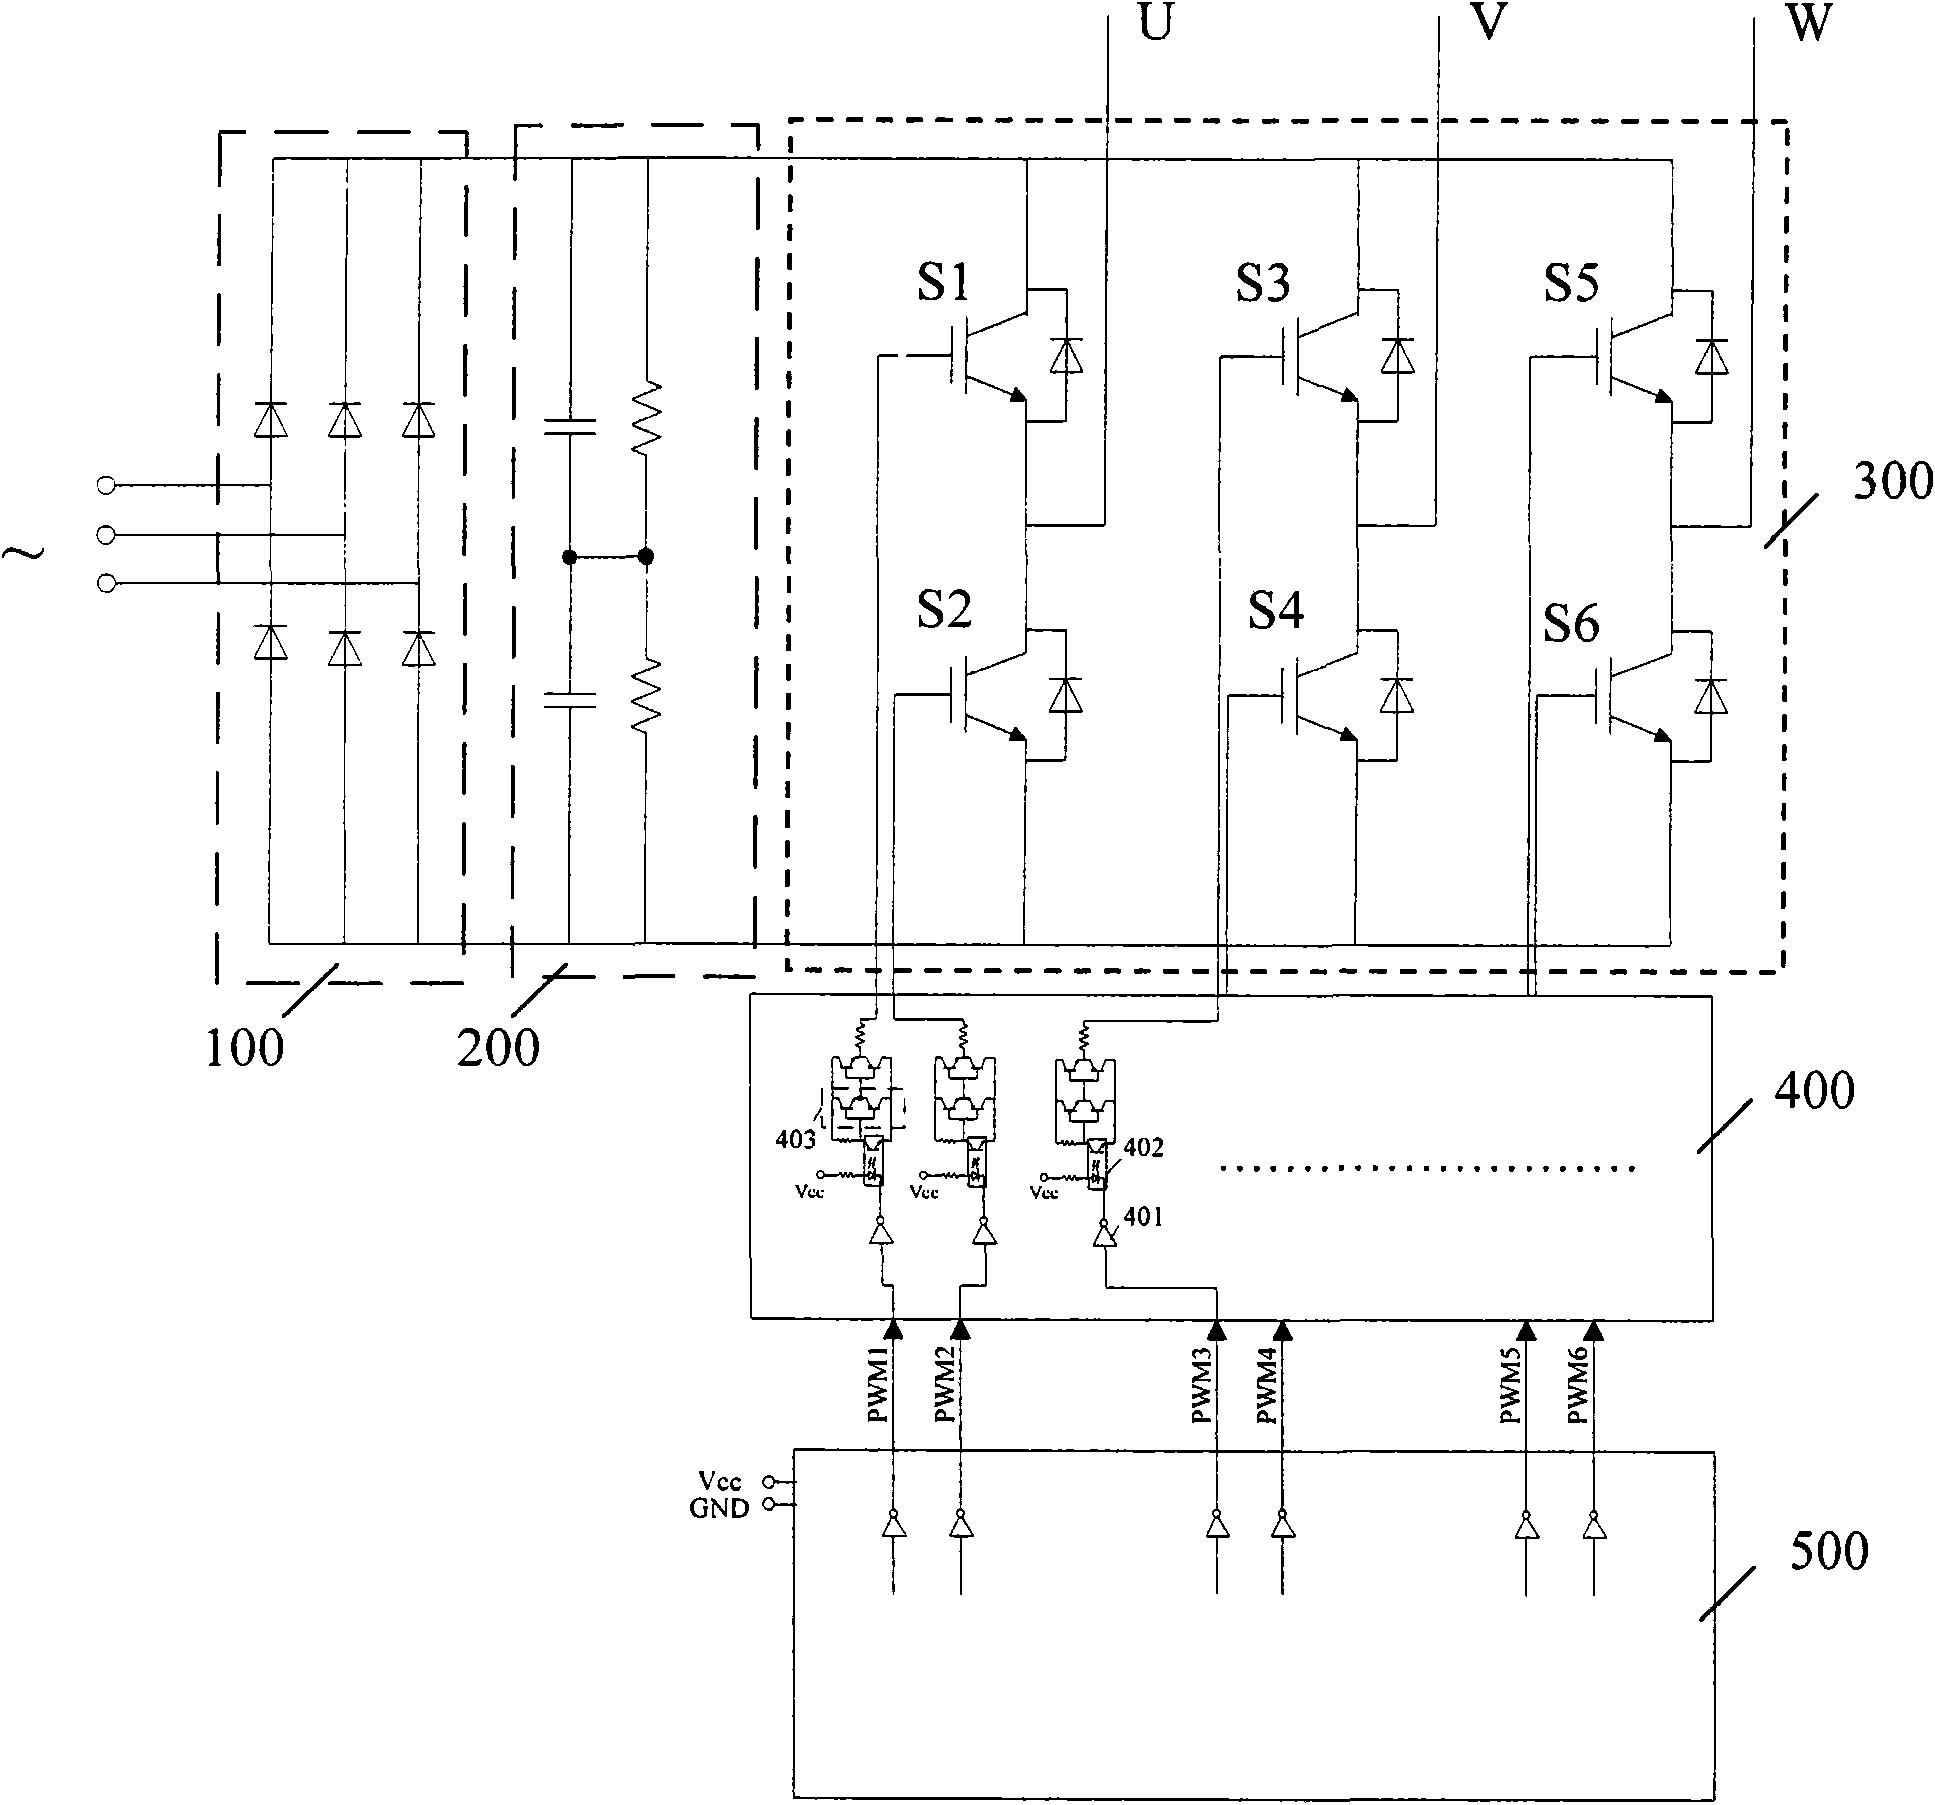 Isolation buffer two-level inversion circuit